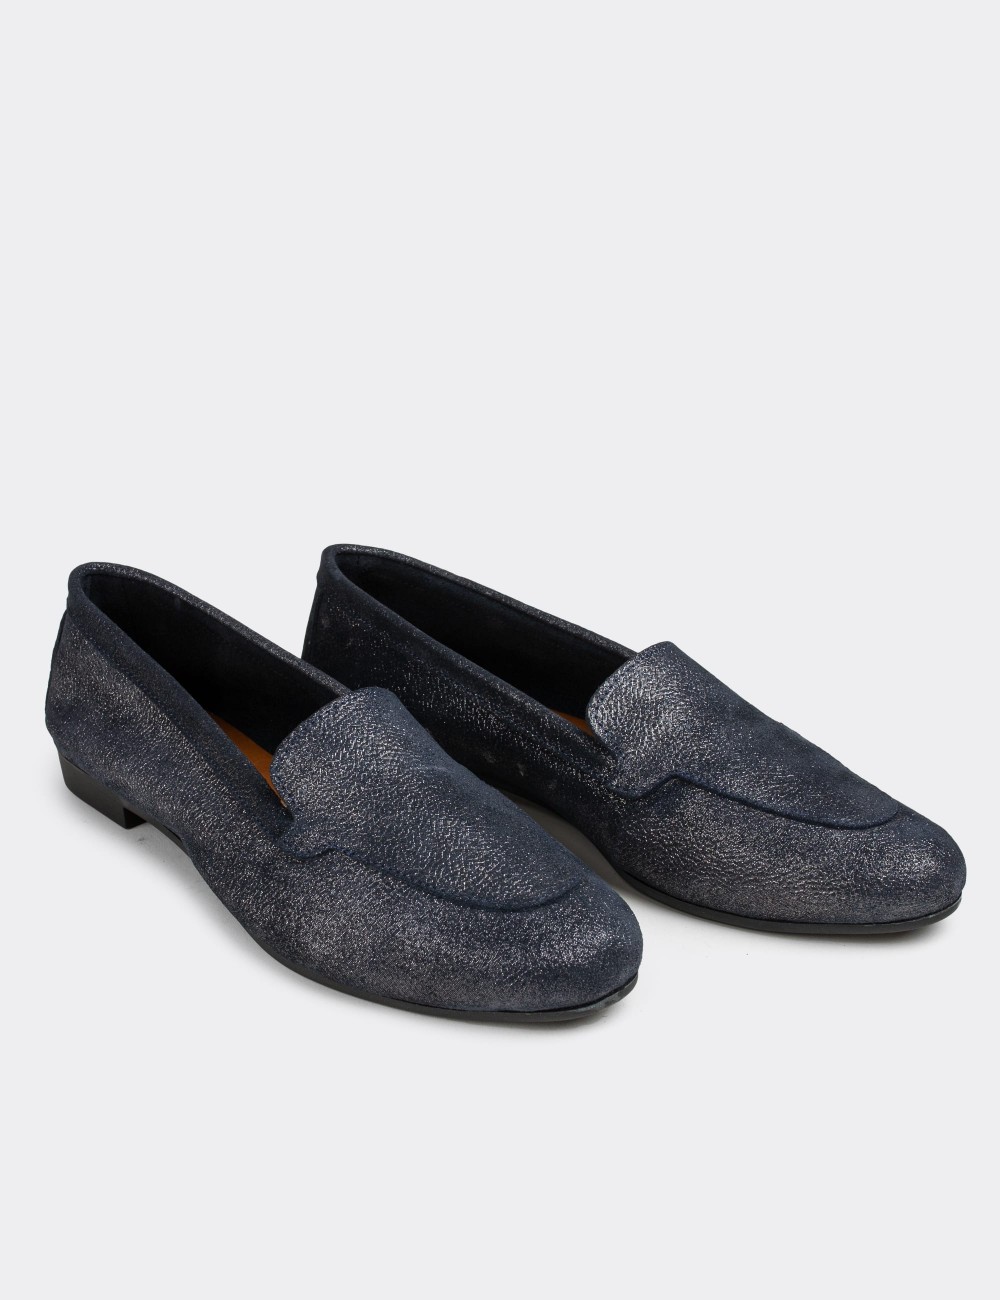 Gray Suede Leather Loafers  - E3206ZGRIC03